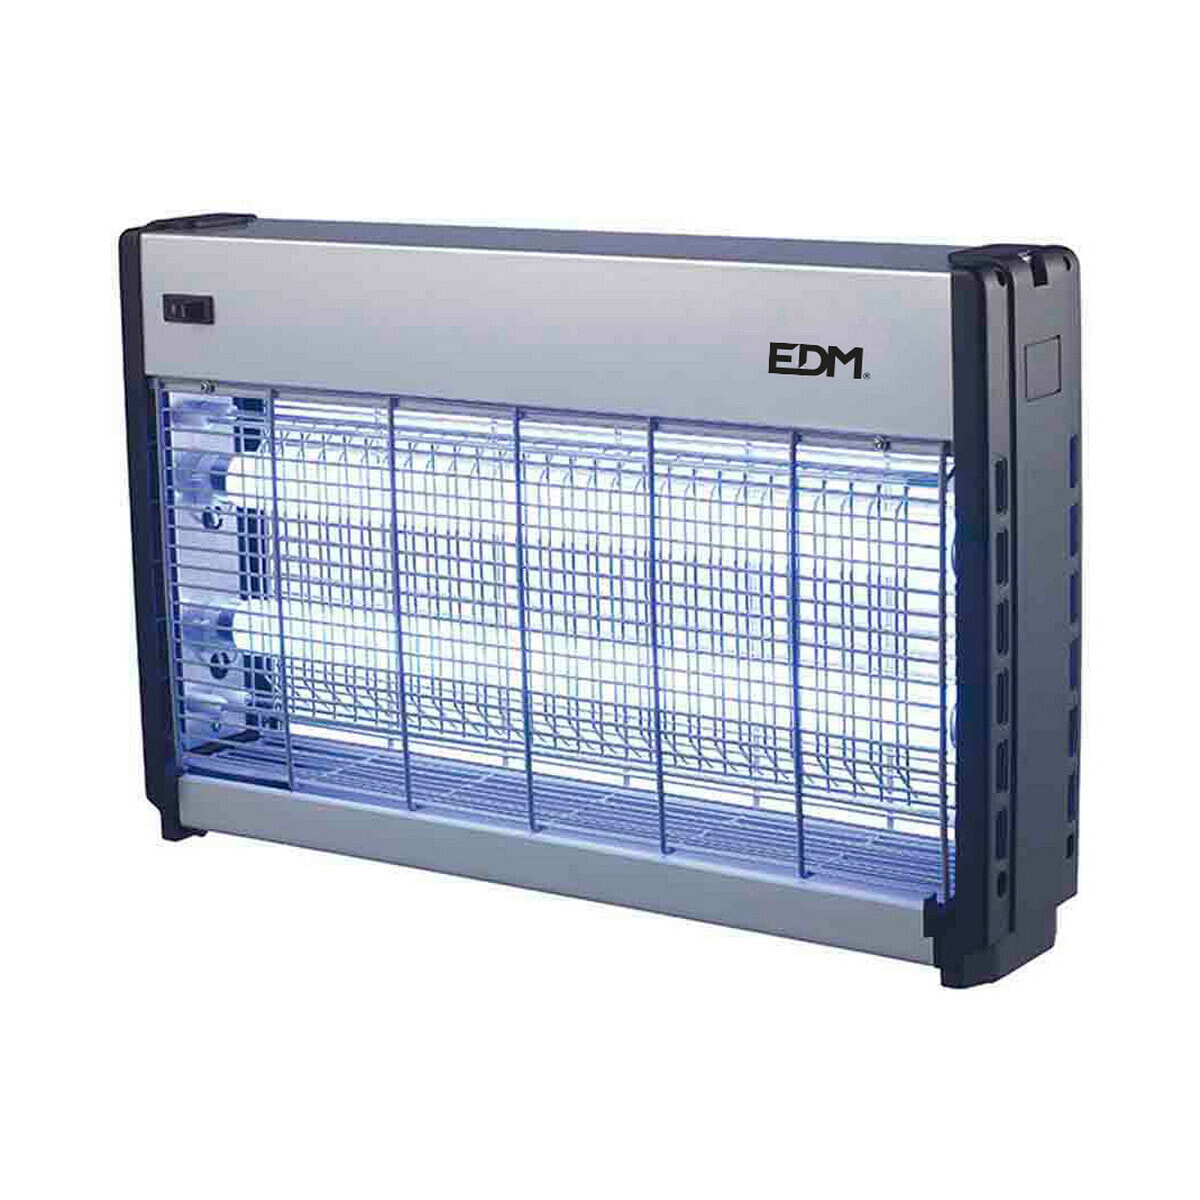 Electric insect killer EDM Silver (49 x 10 x 31 cm)